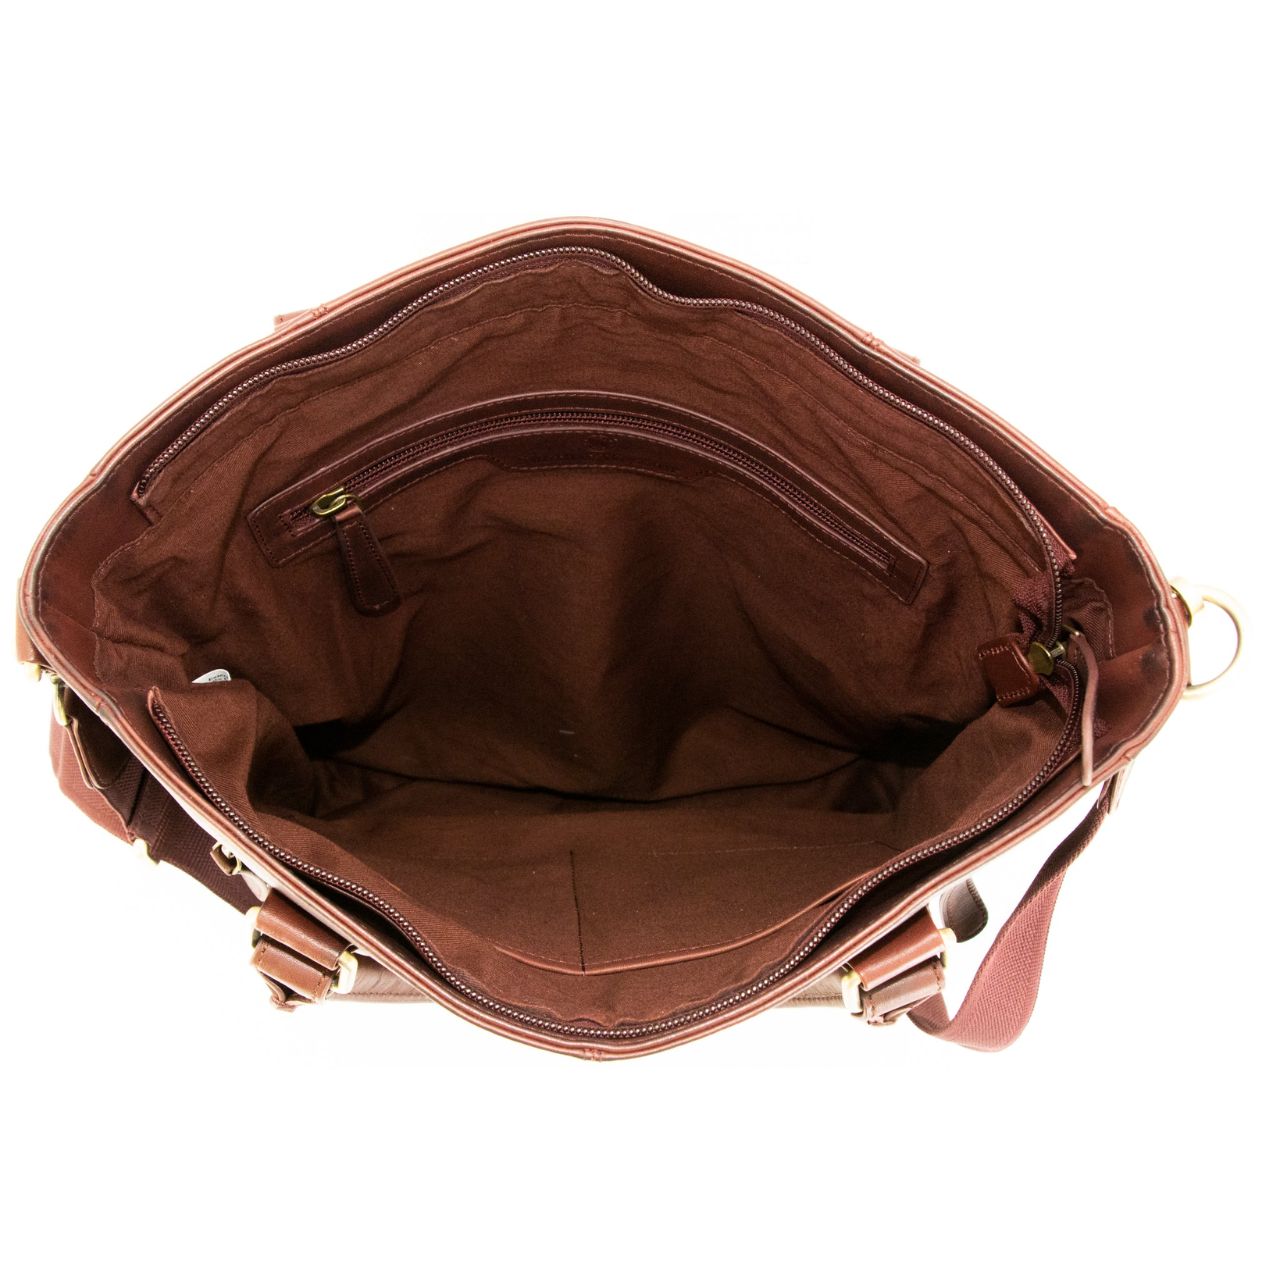 Interior of burgundy flat tote concealed carry purse